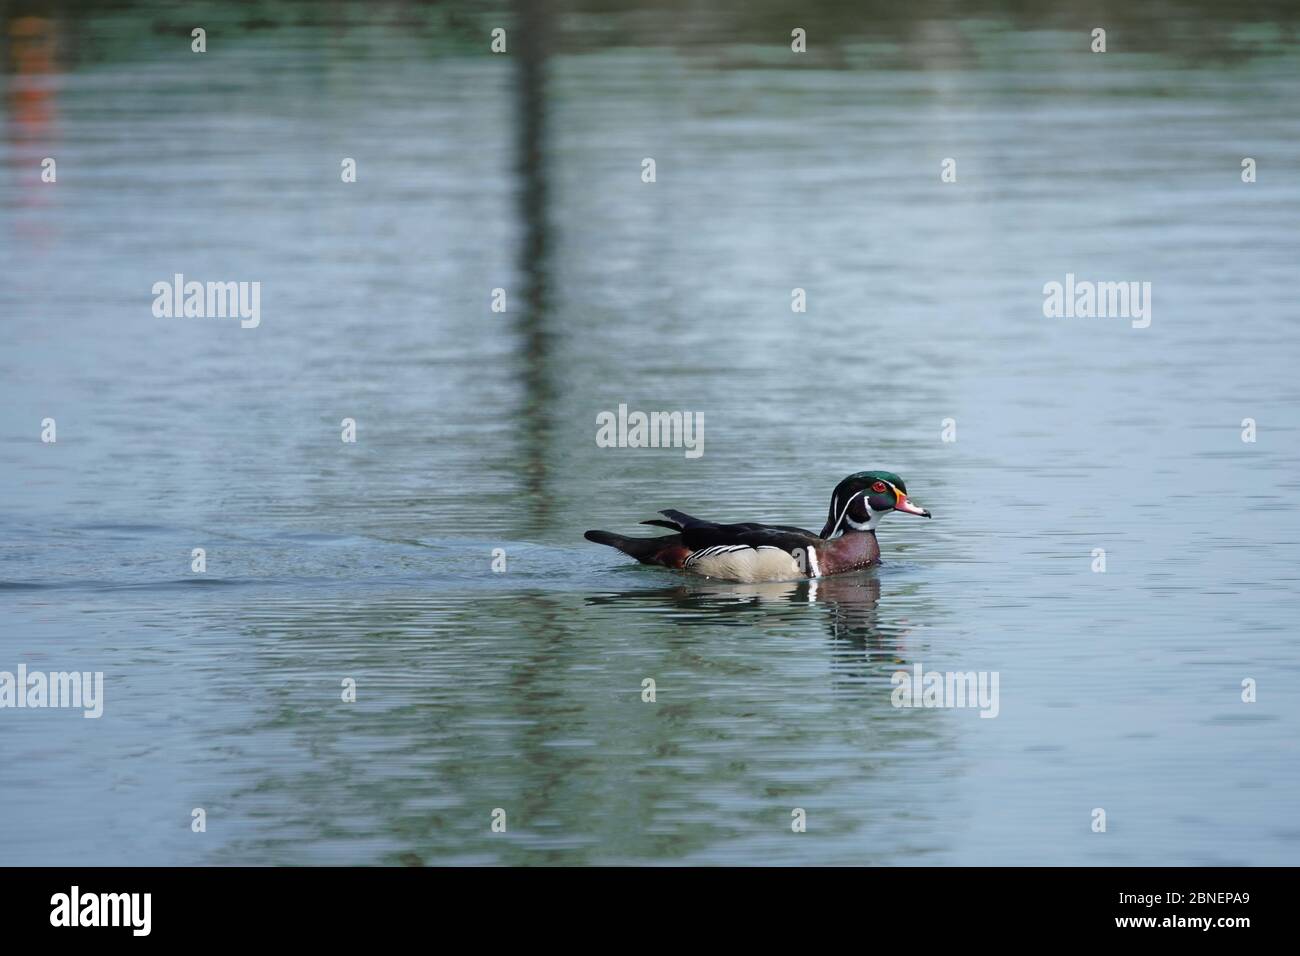 Wood duck swimming on pond Stock Photo